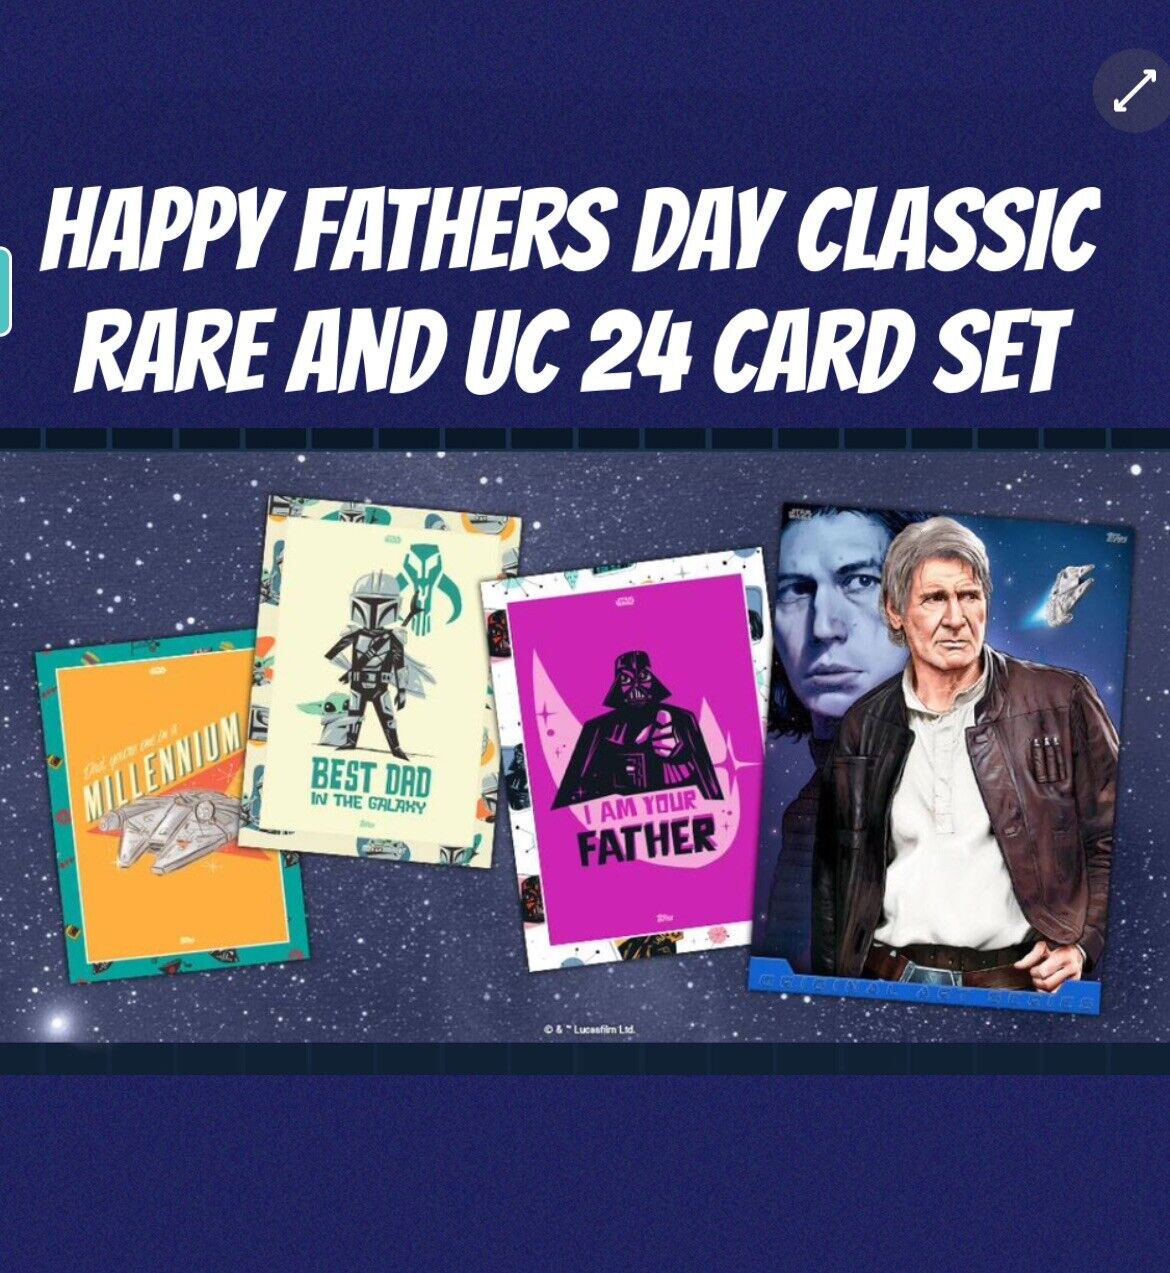 topps star wars card Trader CLASSIC 24 CARD HAPPY FATHERS DAY RARE AND UC